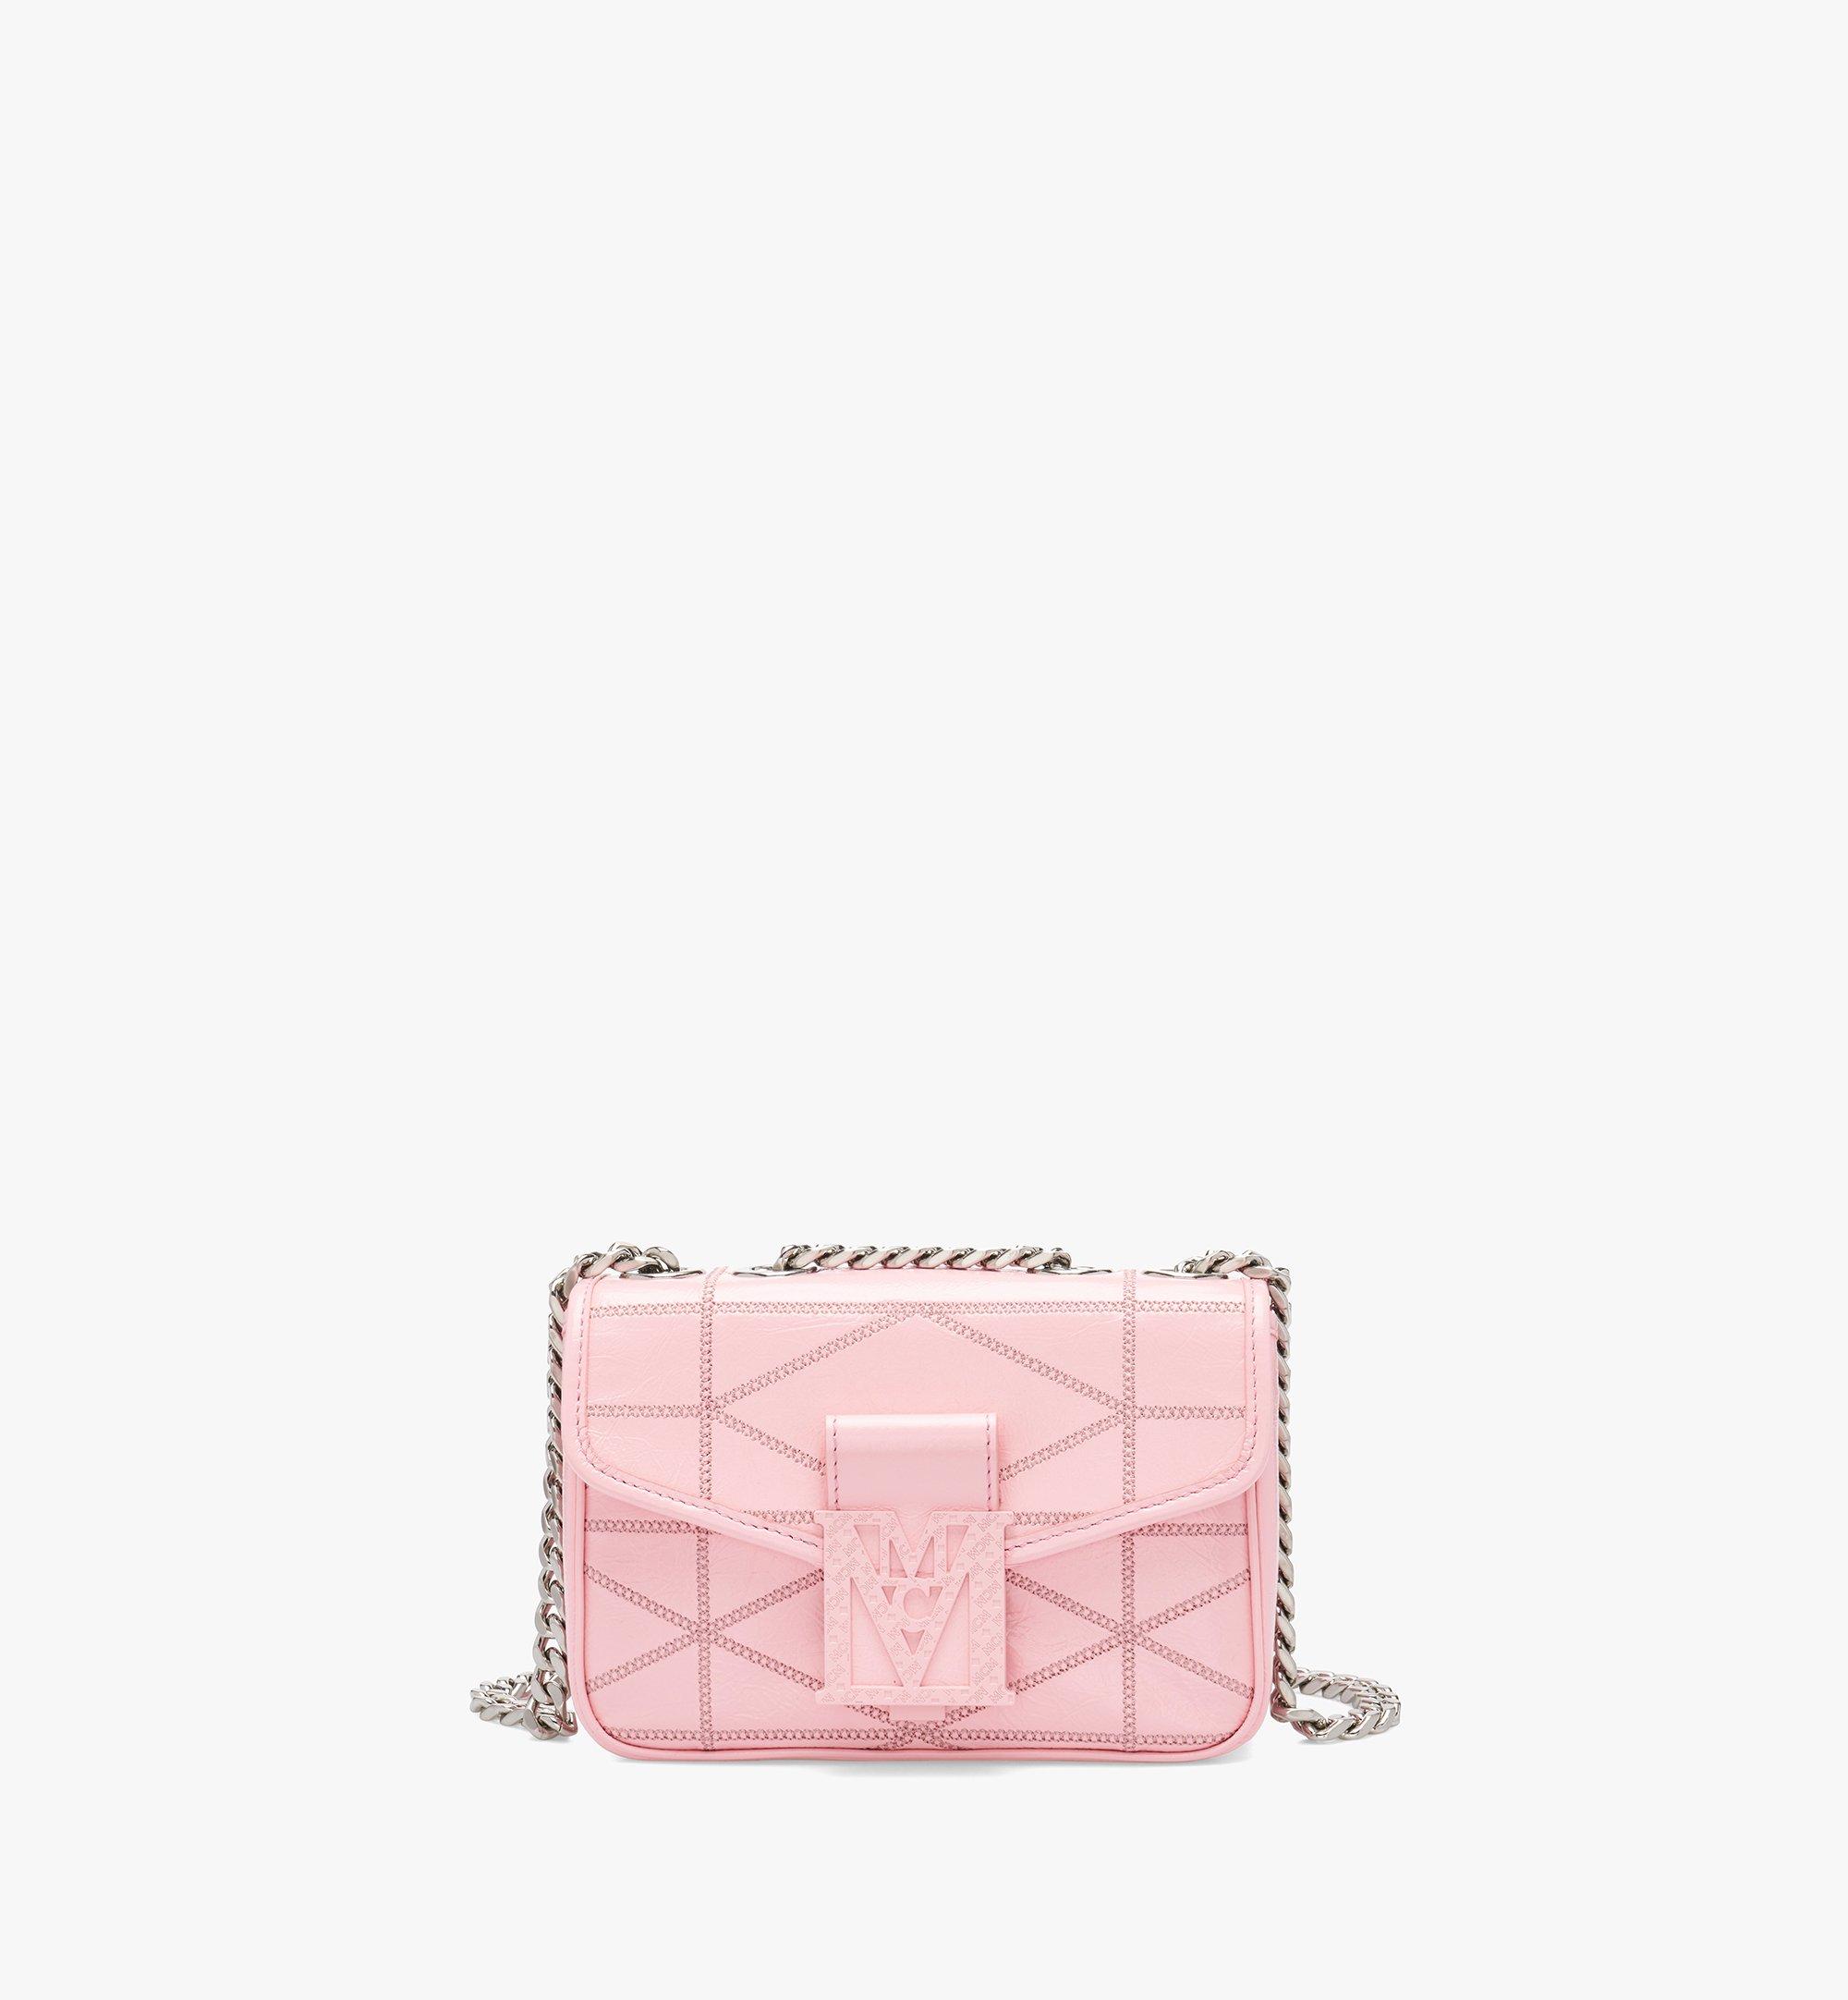 MCM Travia Quilted Shoulder Bag in Crushed Leather Pink MWSCSLM04QH001 Alternate View 1